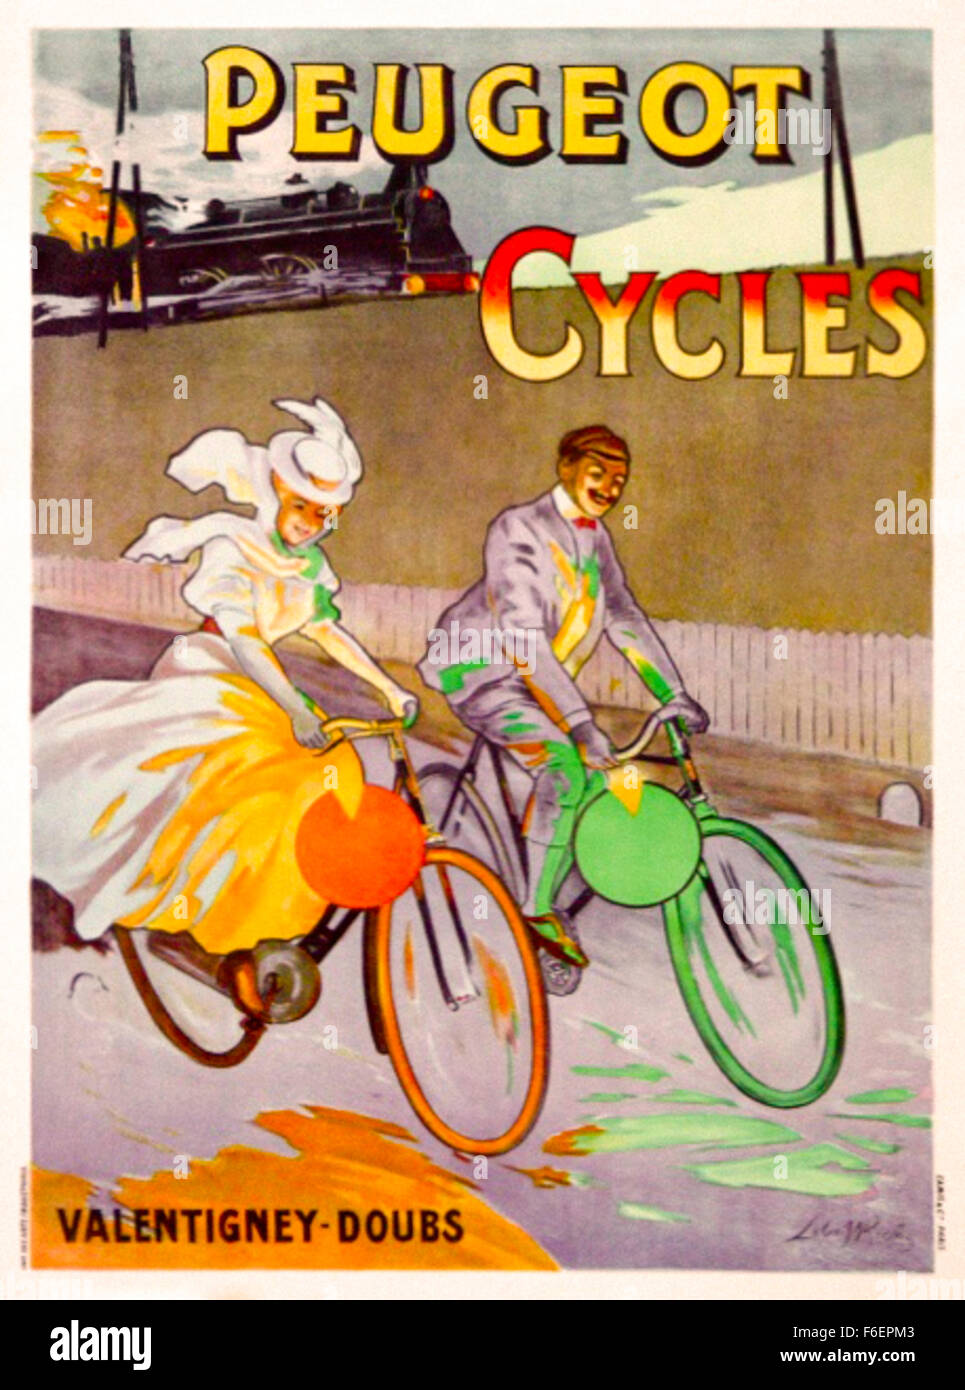 Poster advertising 'Peugeot Cycles' by Almery Lobel-Riche (1880-1950) in art nouveau style circa 1910. Stock Photo